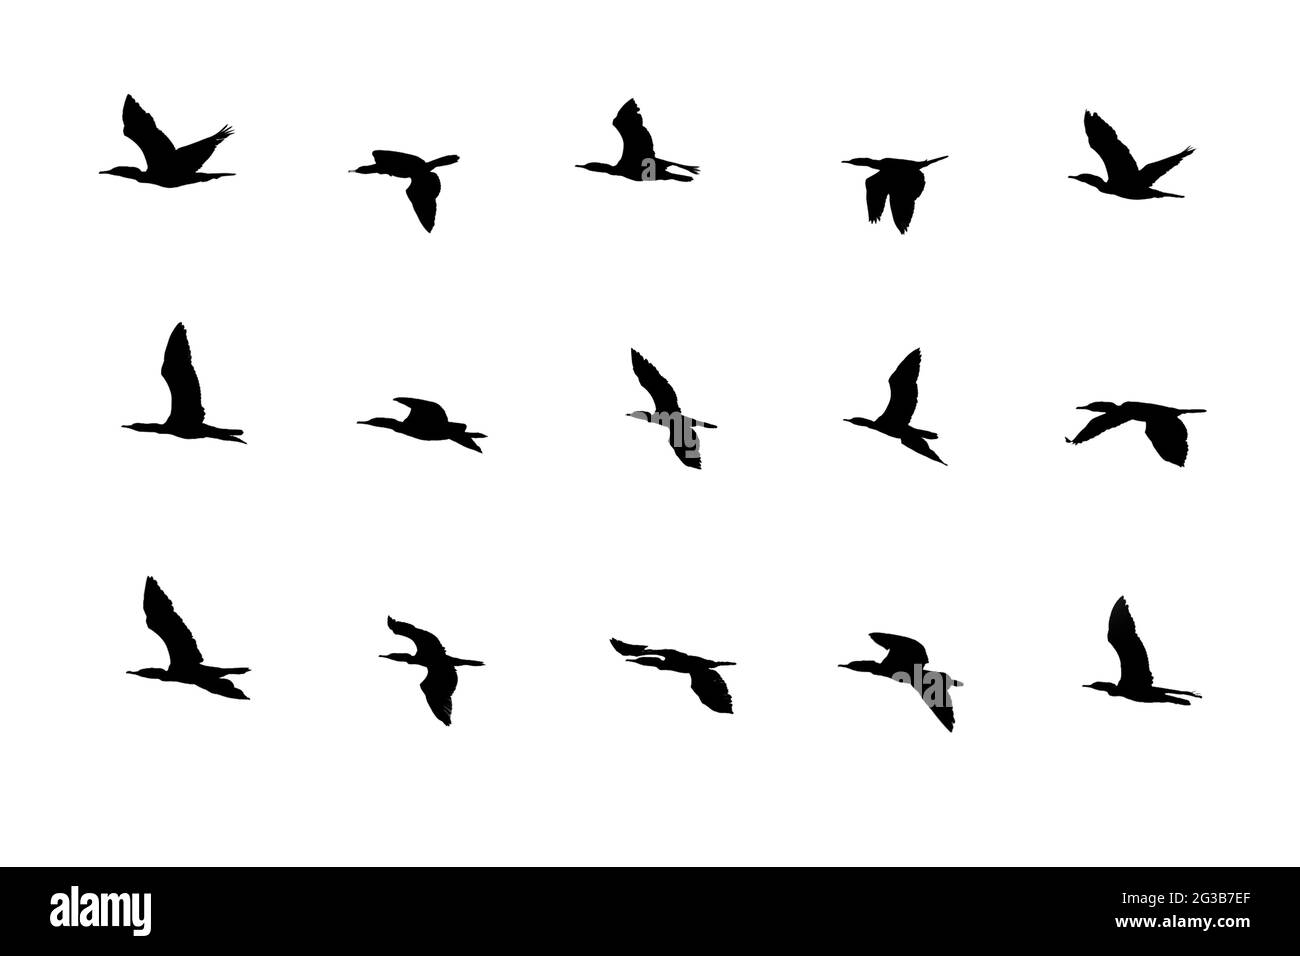 Collection of silhouetted birds in different flying actions isolated on white background. Stock Photo